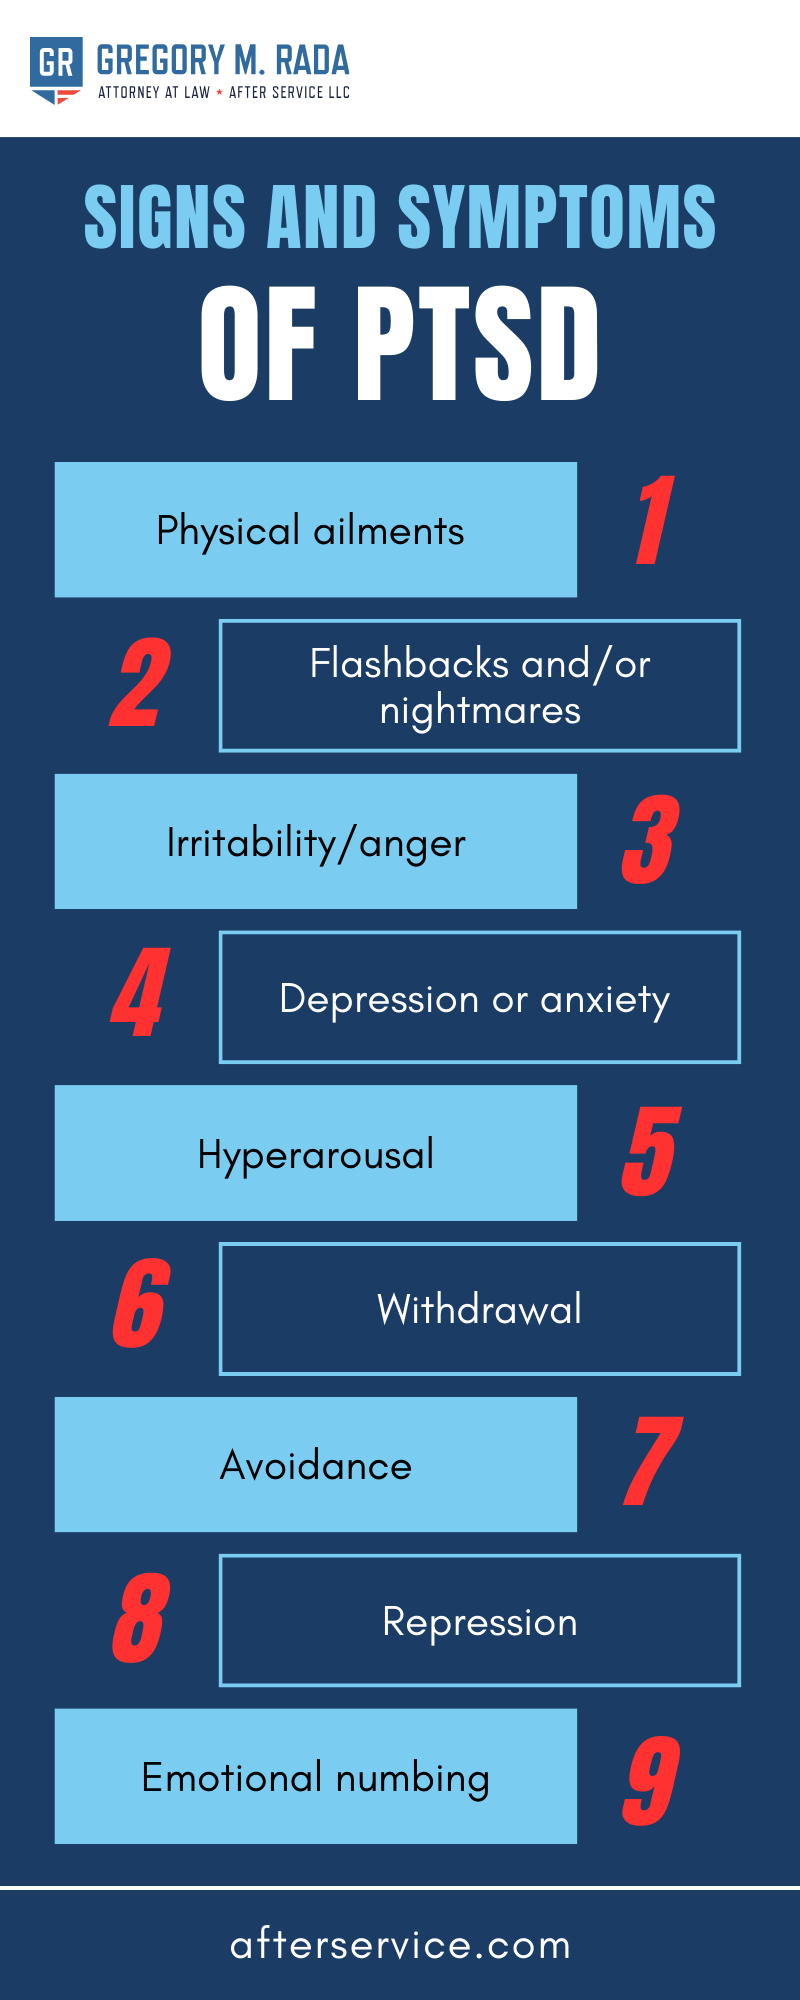 Signs And Symptoms Of PTSD Infographic